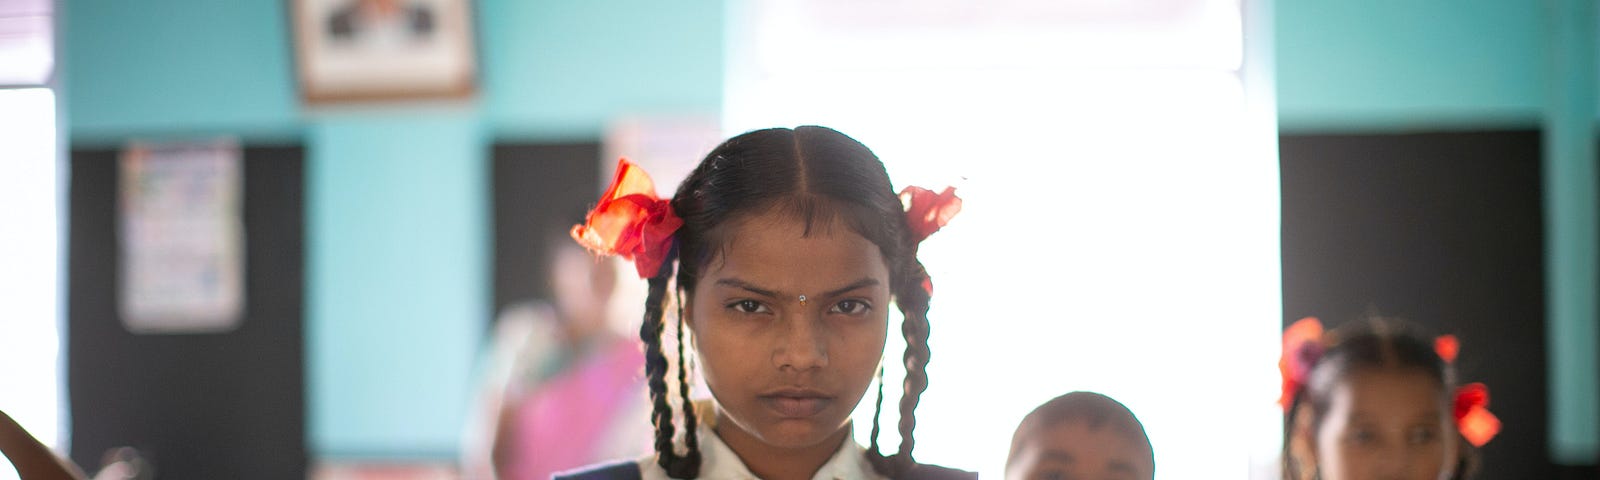 Picture of a girl in a school inform. Her hair is braided and she is looking intensely into the camera. In the background, there are five other children. Credit: Raj Rana via Unspalsh.